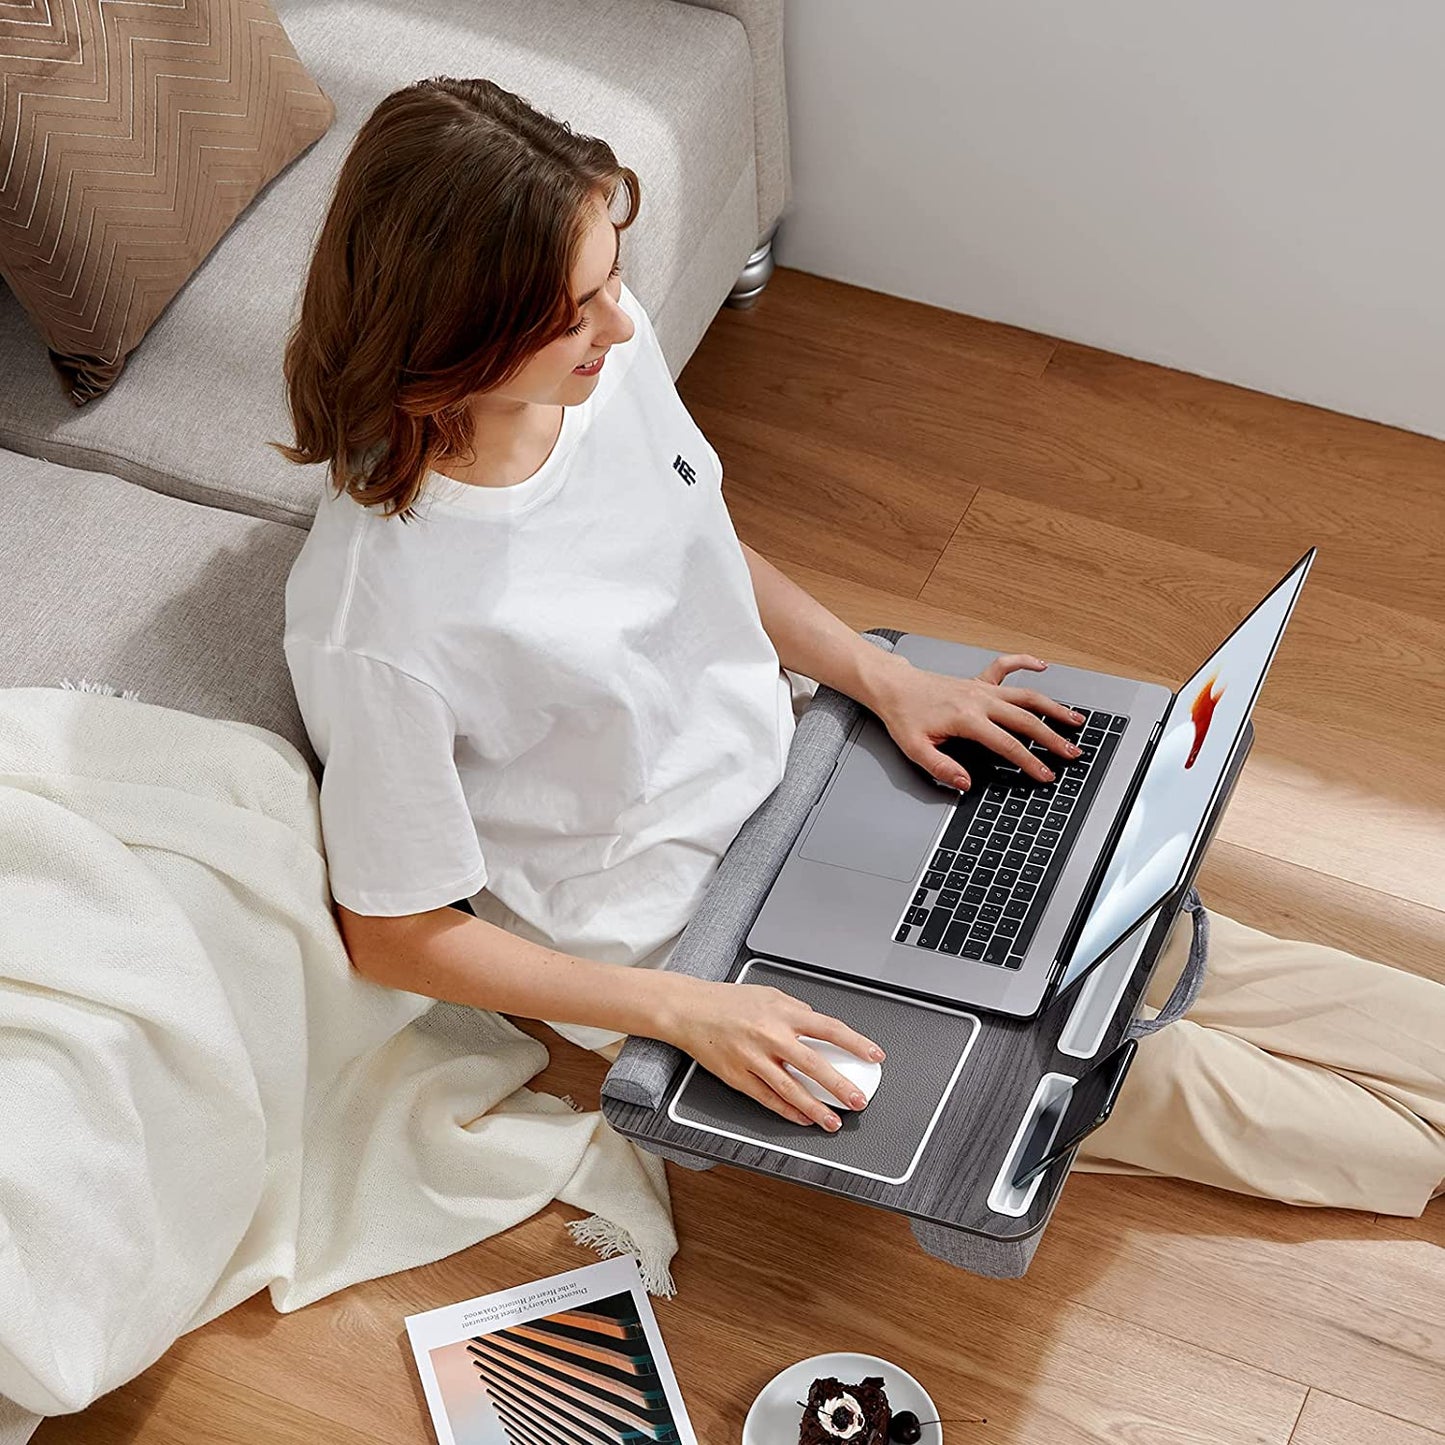 2-In-1 Bed And Lap Desk – Huanuo